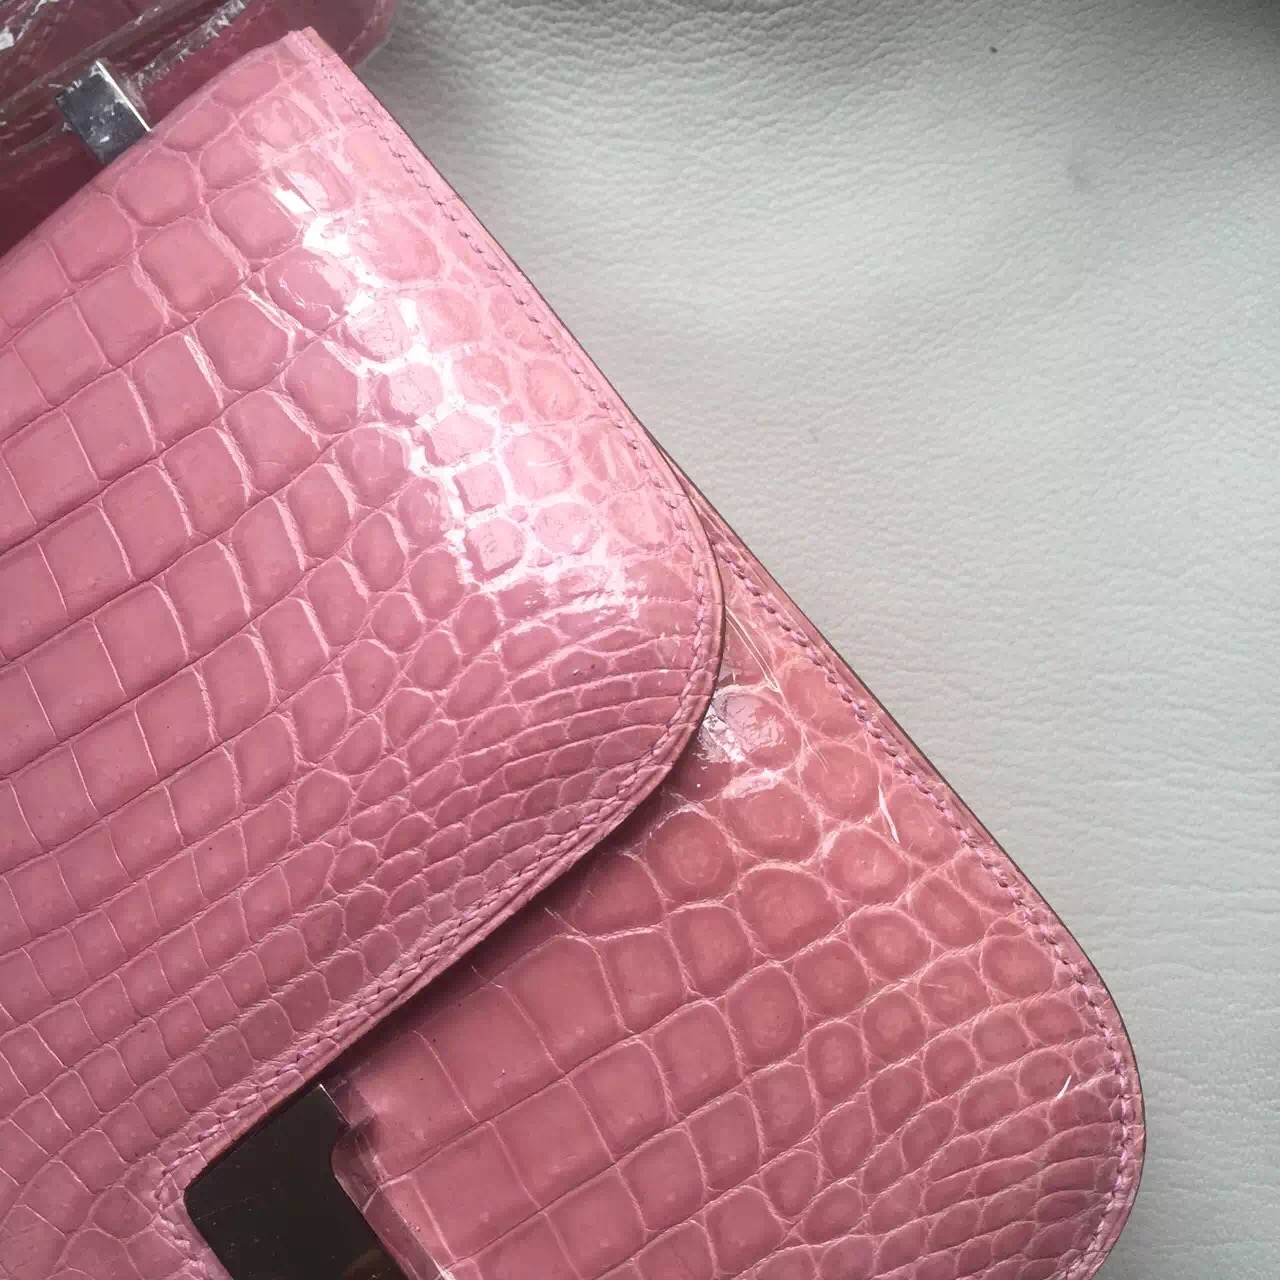 Pretty Hermes Crocodile Leather Constance Bag 24cm in Peach Pink